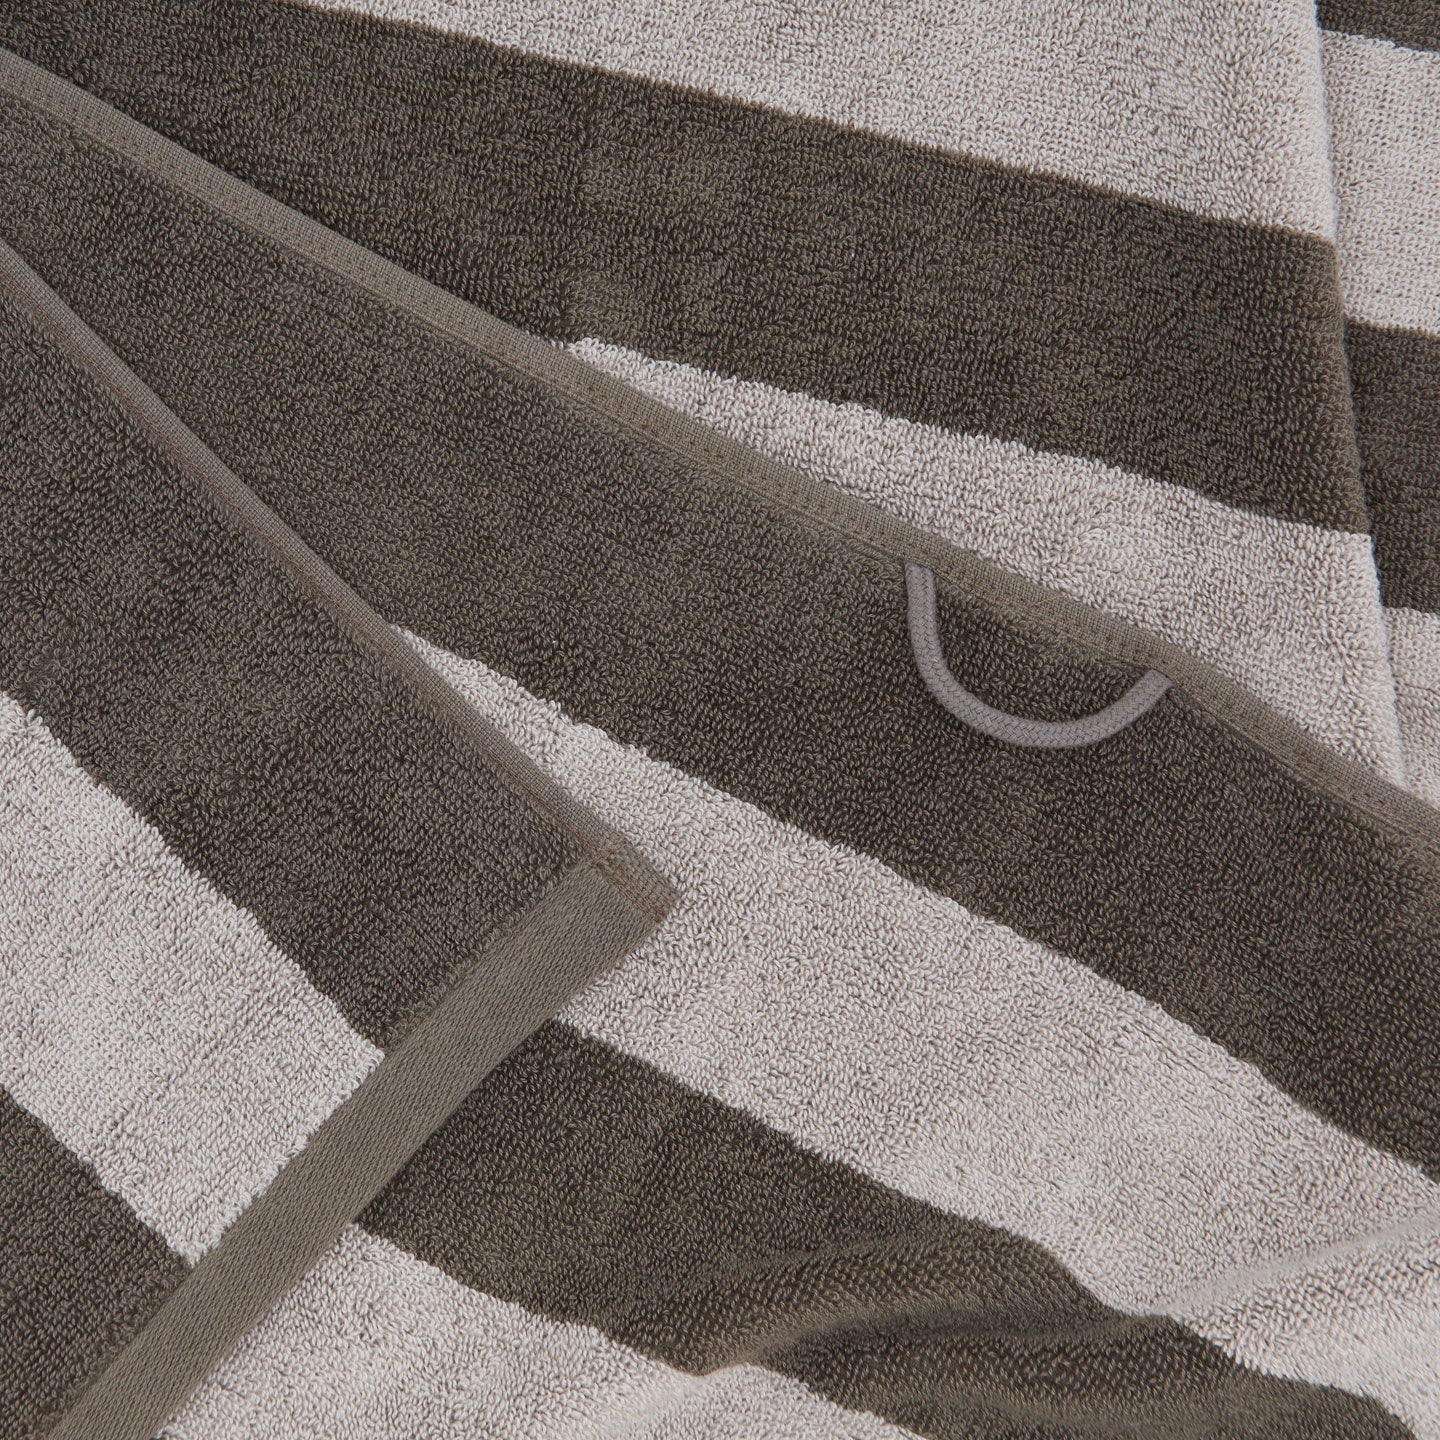 A close up of a striped light grey and dark grey terry bath towel with a hanging loop.